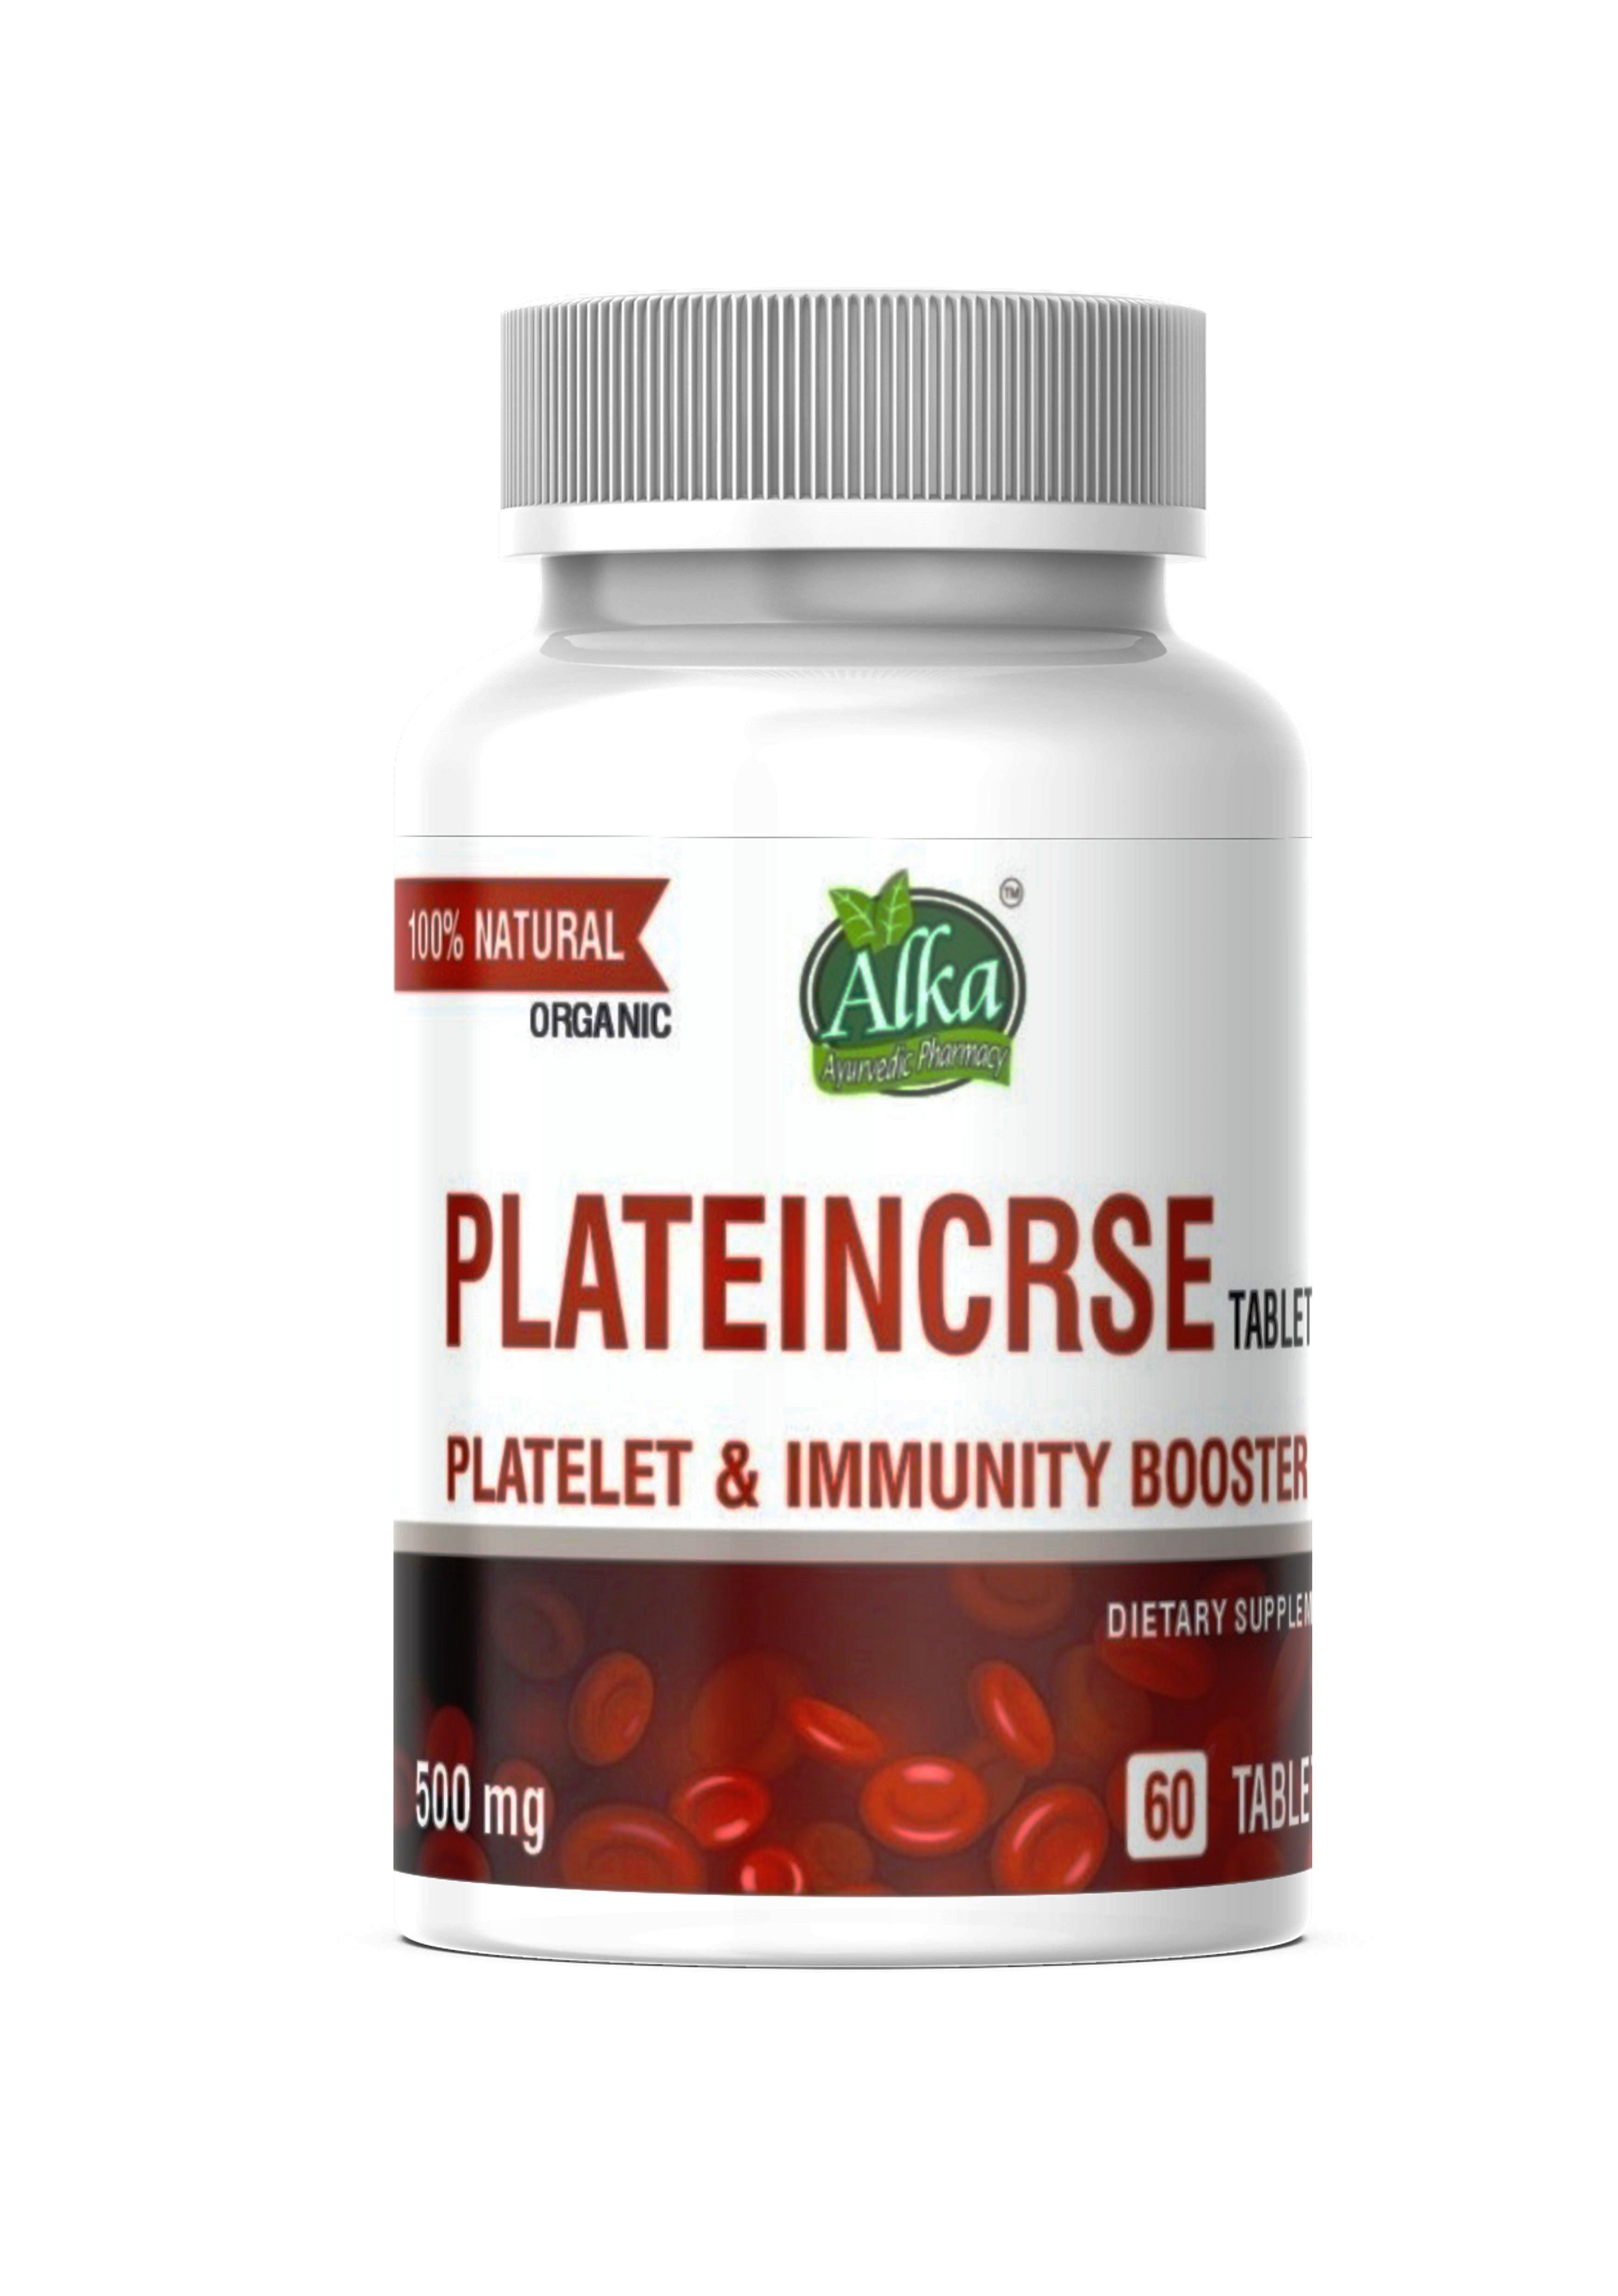 Plateincrse Tablet -For Platelet count & Immunity Booster-60 Tablet